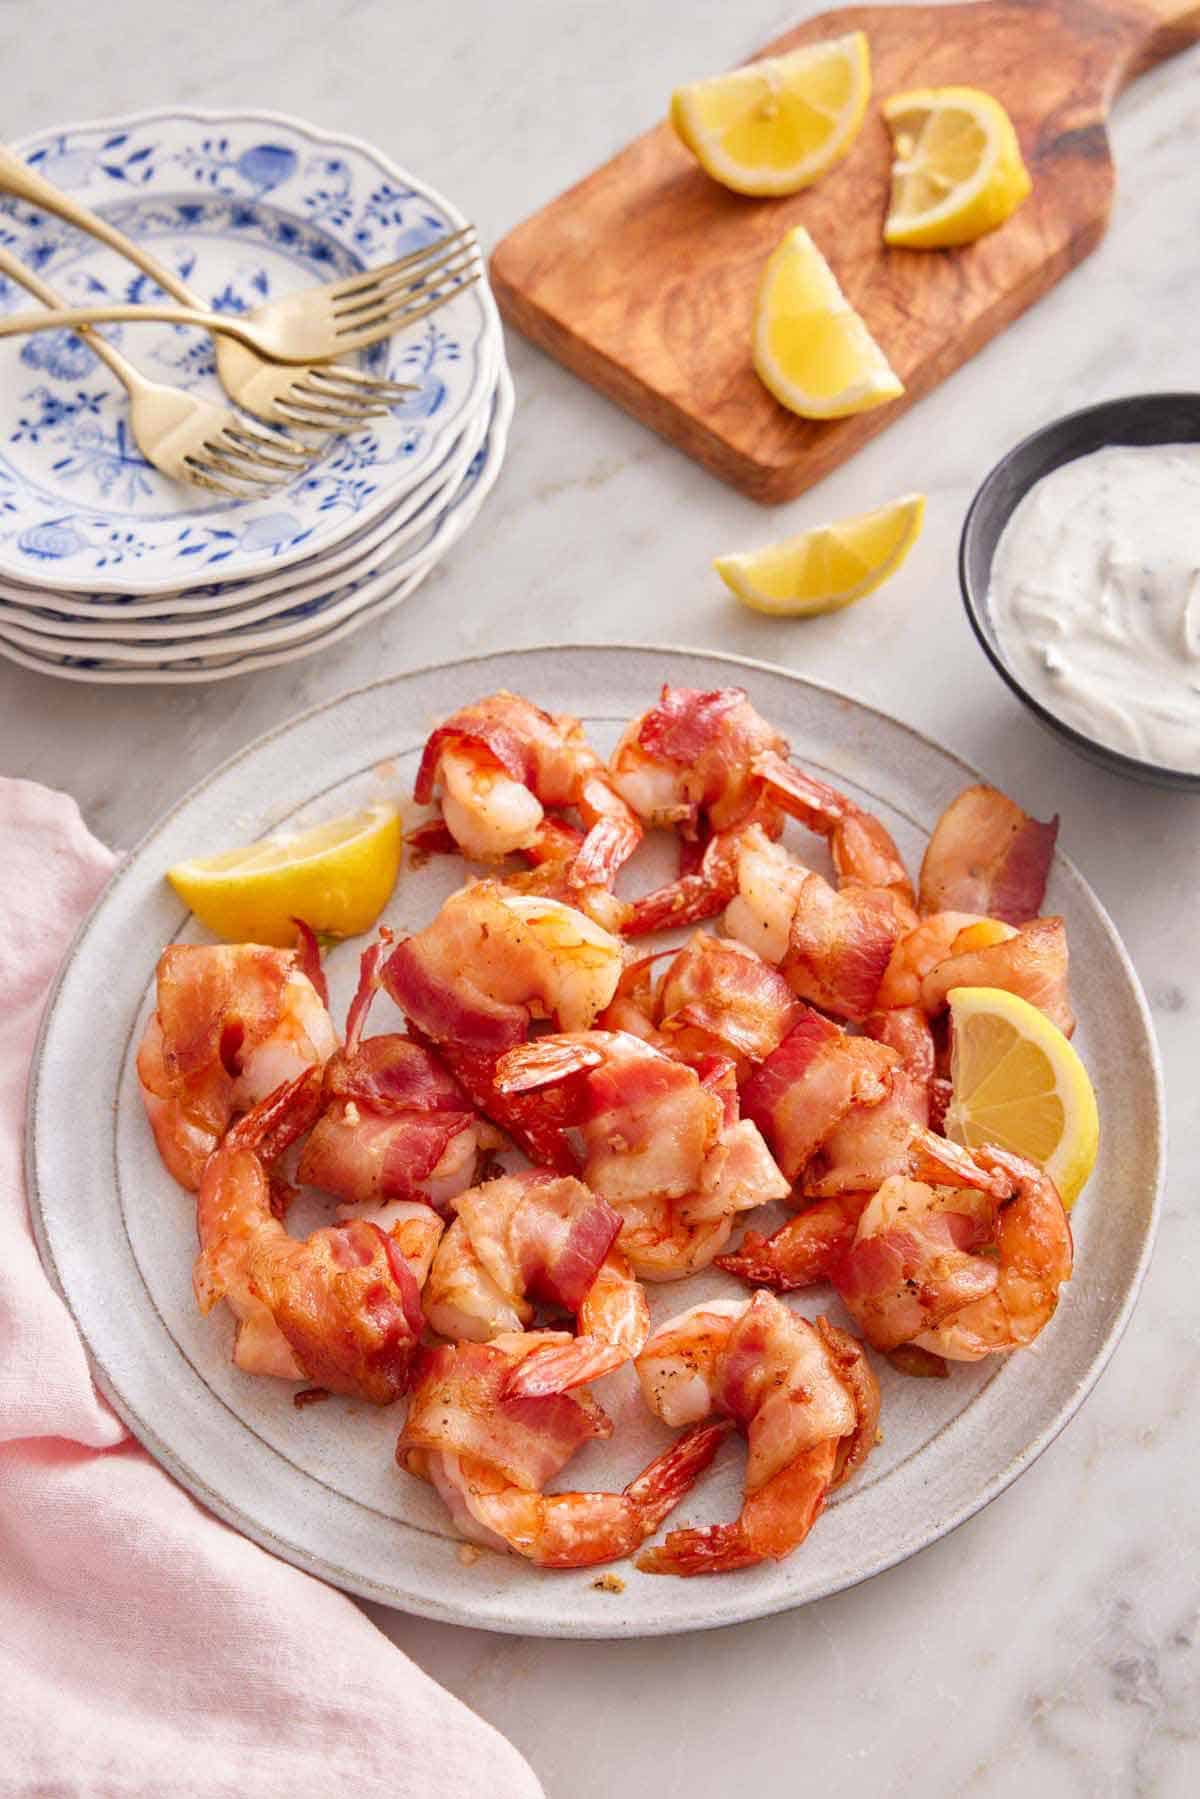 A plate of bacon wrapped shrimp with two lemon wedges with dip, more lemons, plates, and forks in the back.